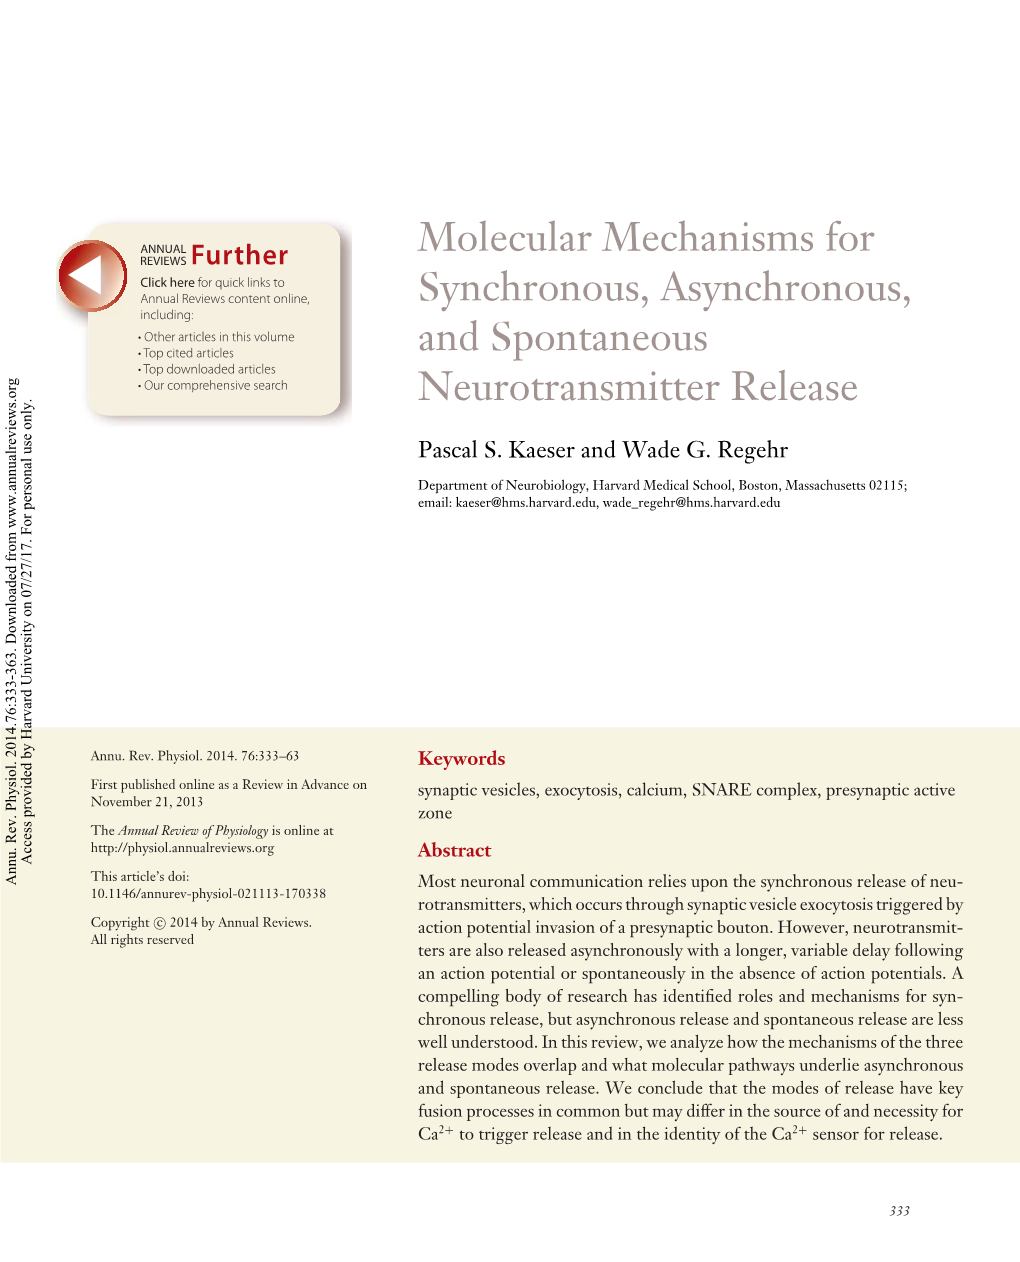 Molecular Mechanisms for Synchronous, Asynchronous, and Spontaneous Neurotransmitter Release